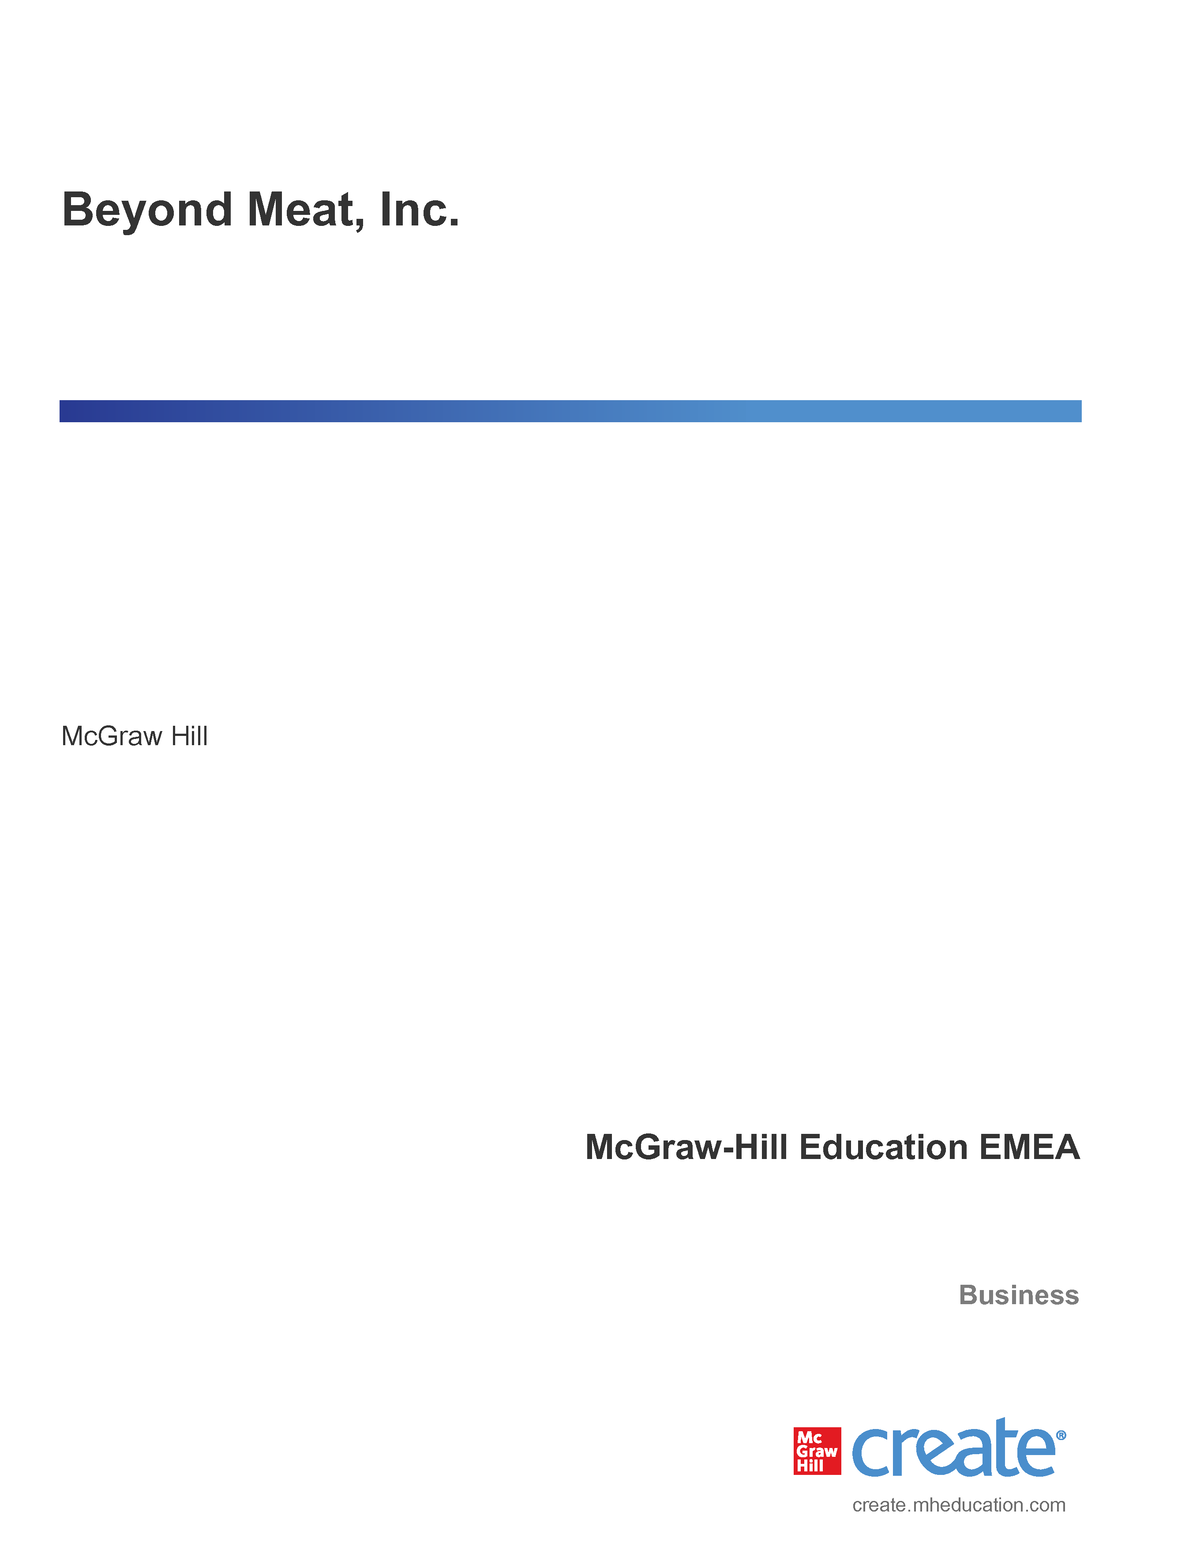 beyond meat case study solution